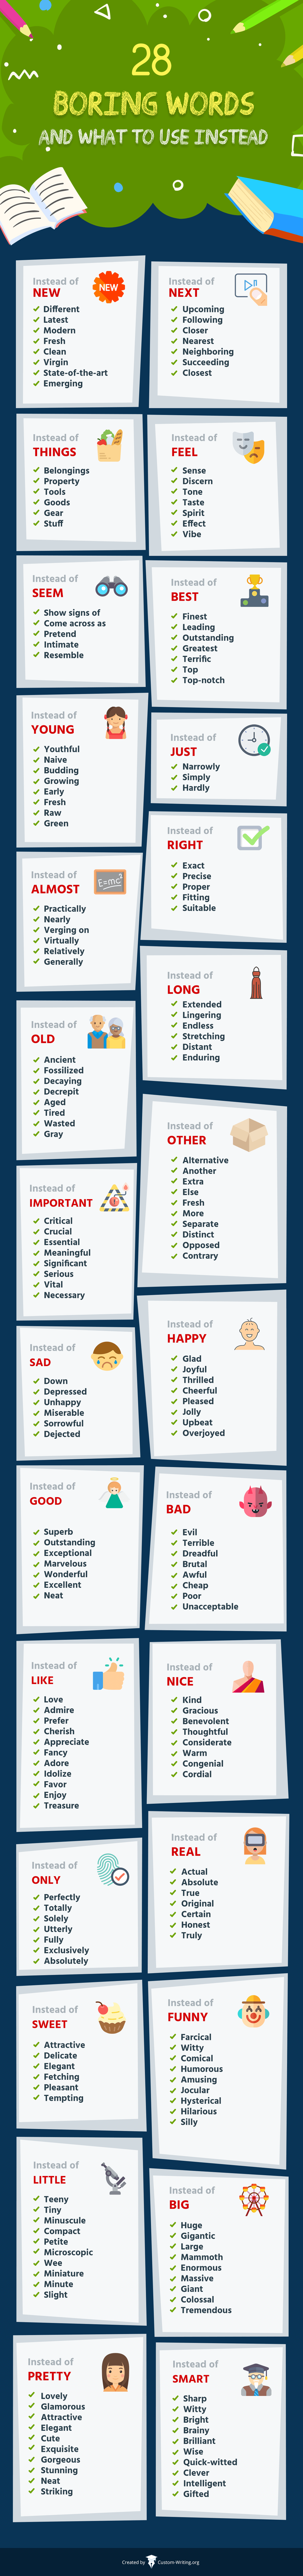 Infographic: 28 Boring Words and What to Use Instead by Jack Milgram of Custom Writing | From the blog of Nicholas C. Rossis, author of science fiction, the Pearseus epic fantasy series and children's books